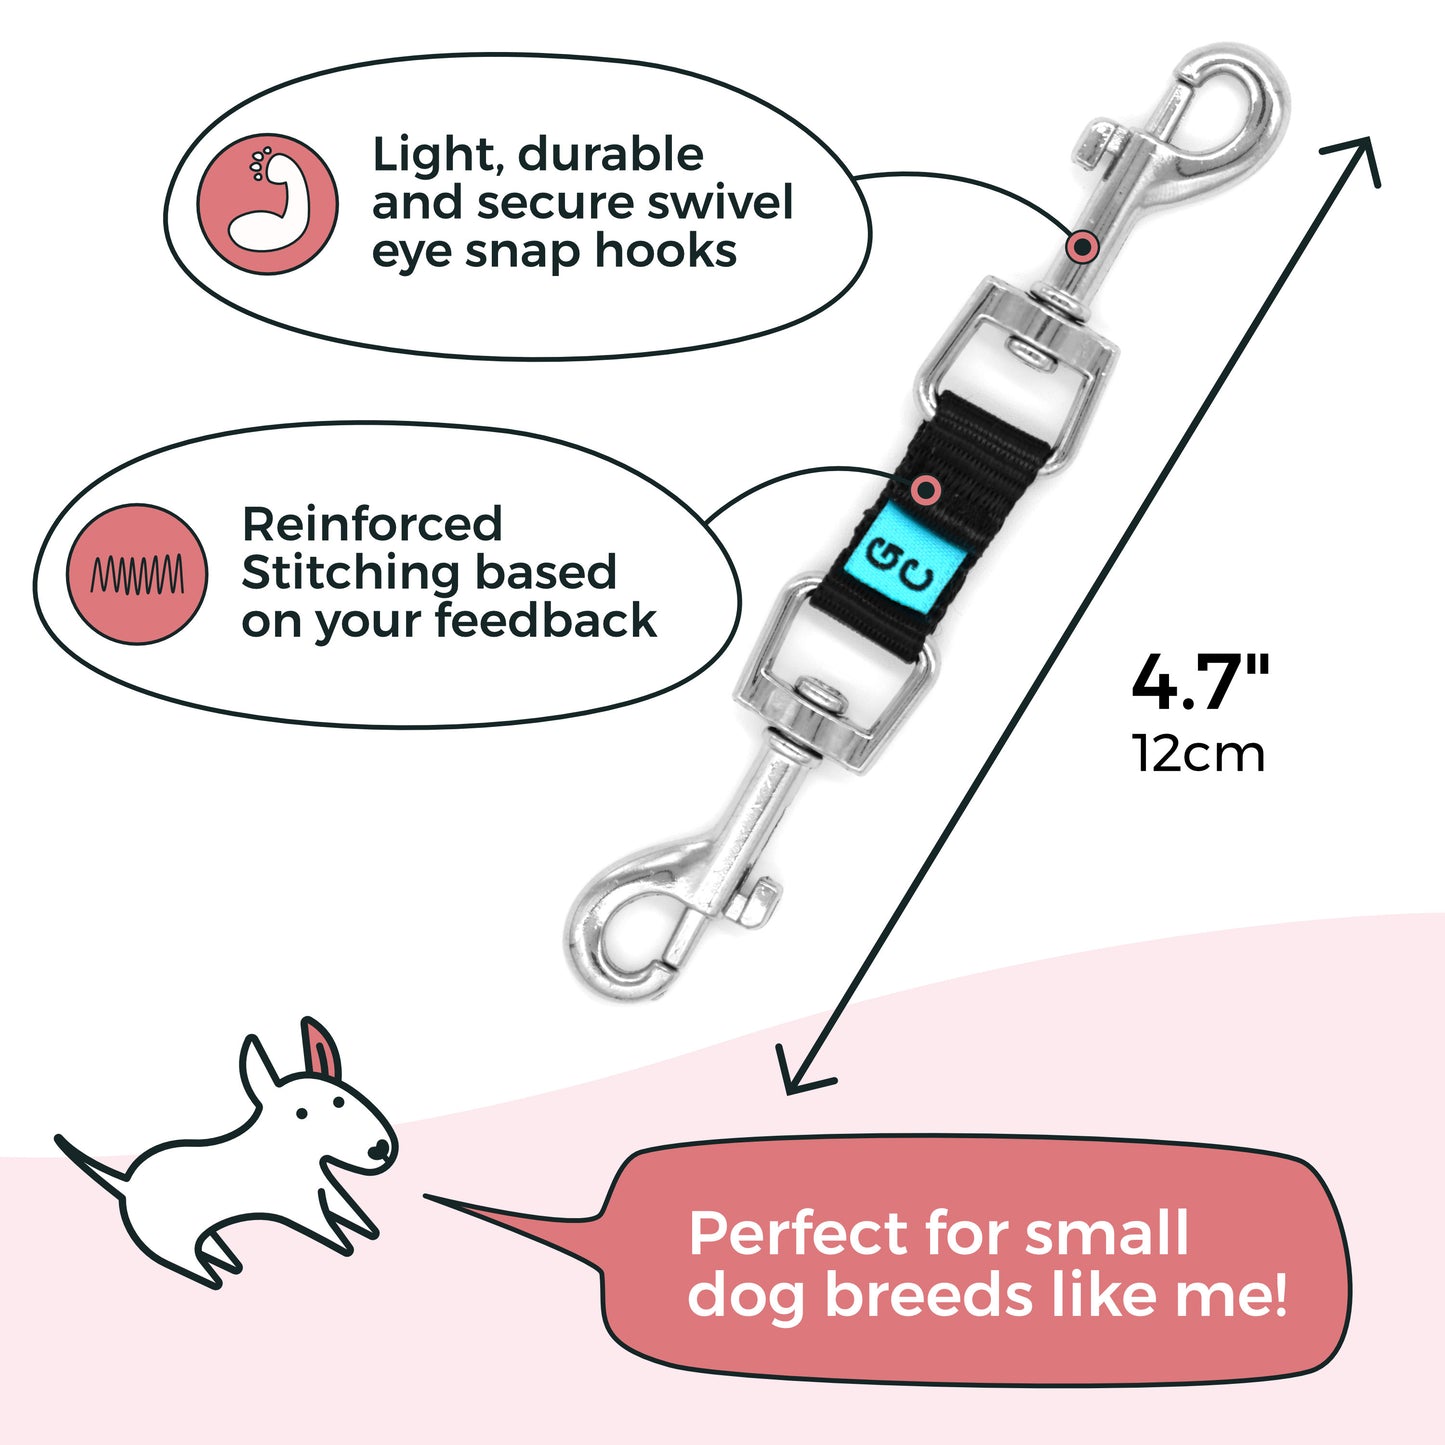 Light, durable and secure swivel eye snap hooks, reinforced stitching based on your feedback, perfect for small breeds at 4.7 inches